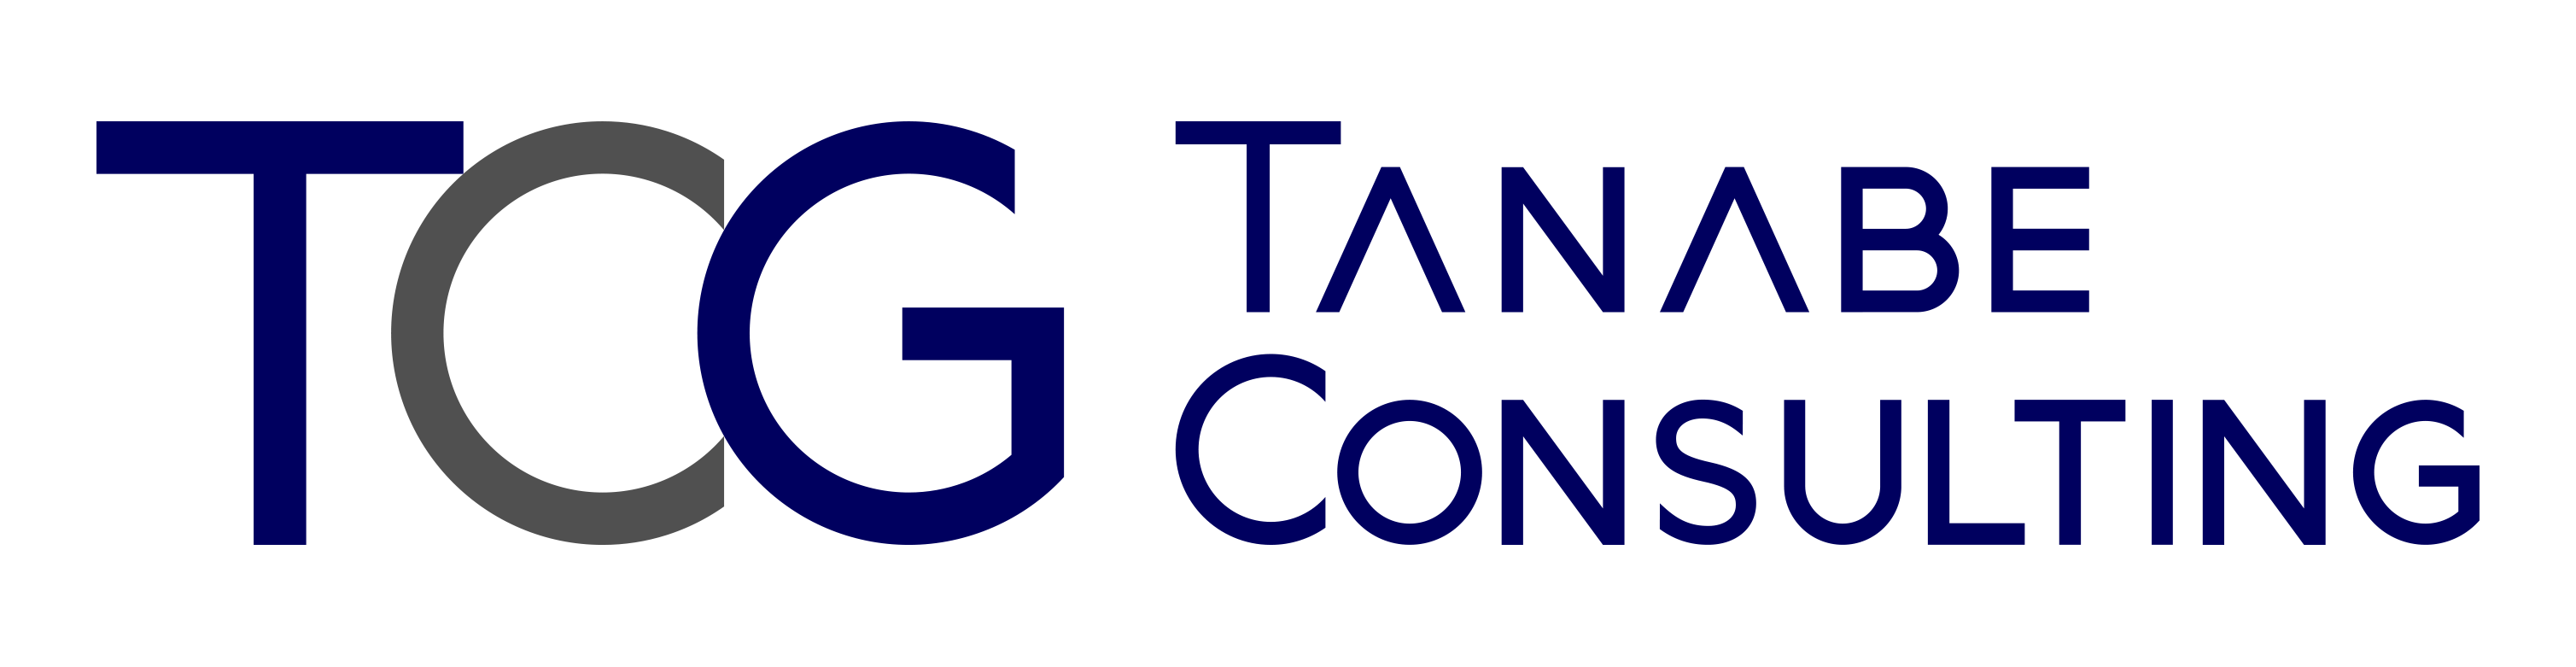 TCG TANABE CONSULTING GROUP